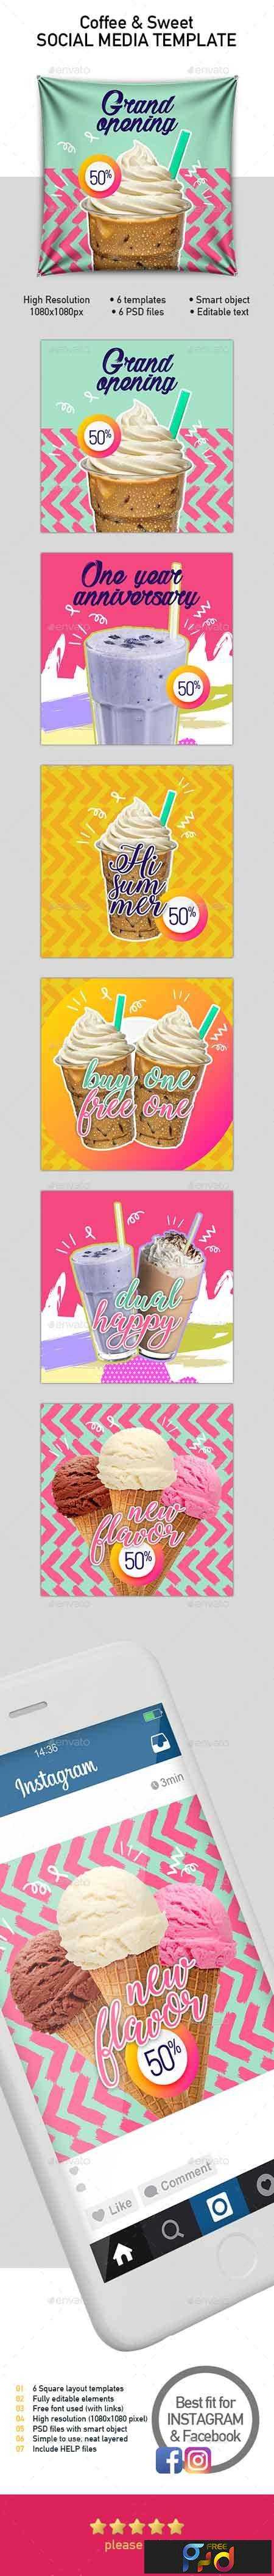 FreePsdVn.com_1704281_TEMPLATE_set_6_instagram_templates_for_food_and_drinks_business_20238514